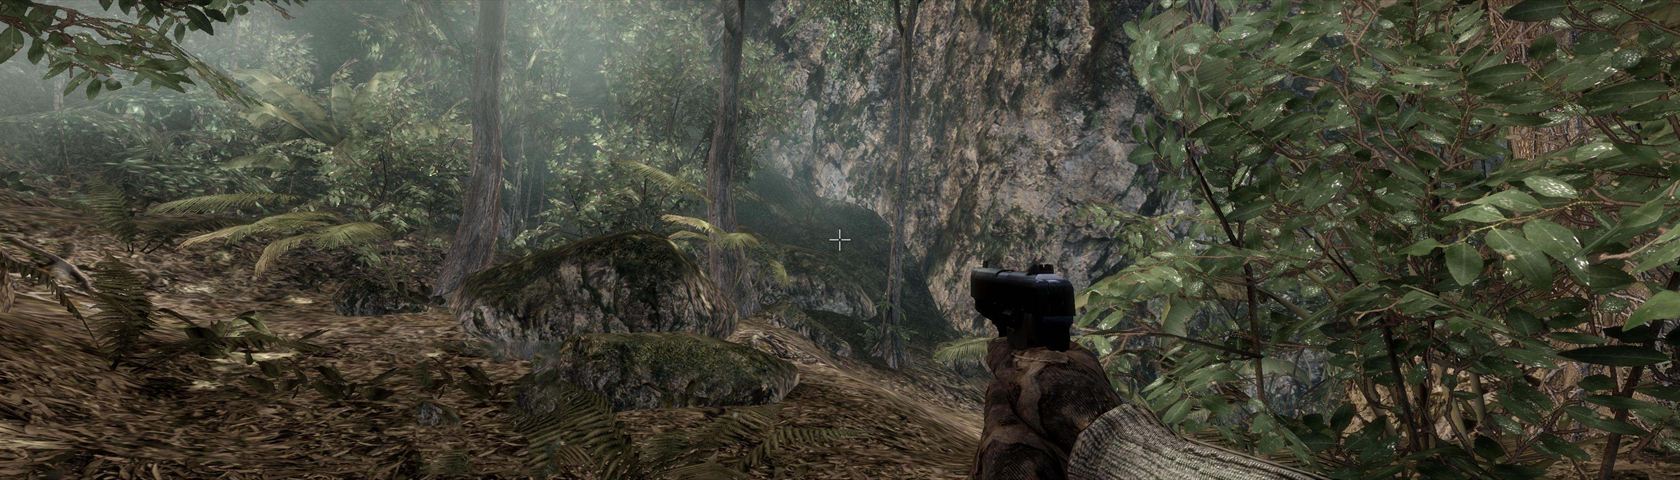 Battlefield: Bad Company 2: In the Woods